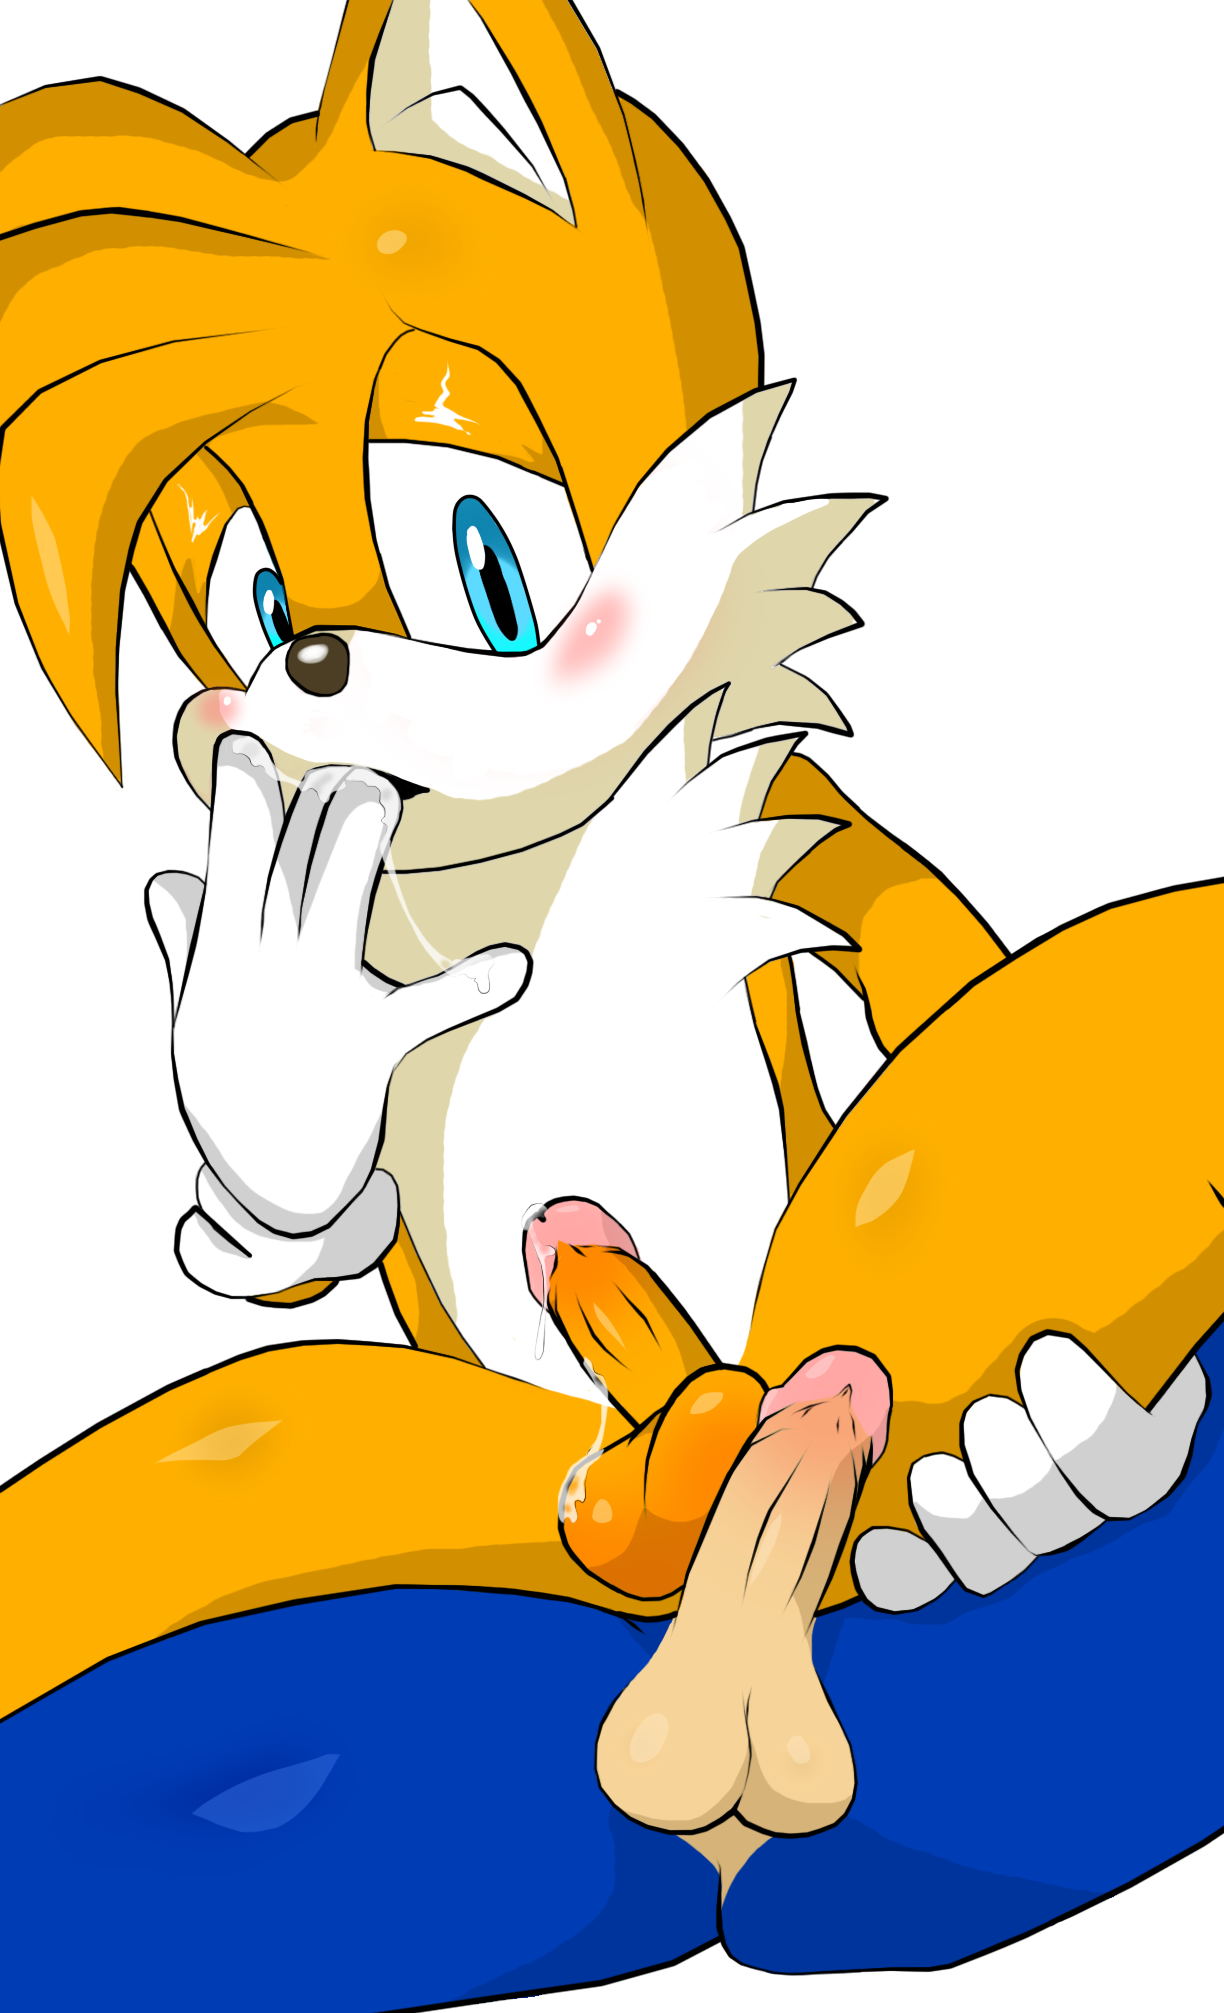 Tails x sonic porn - 🧡 Sonic and Tails Series (Sonic The Hedgehog) ...